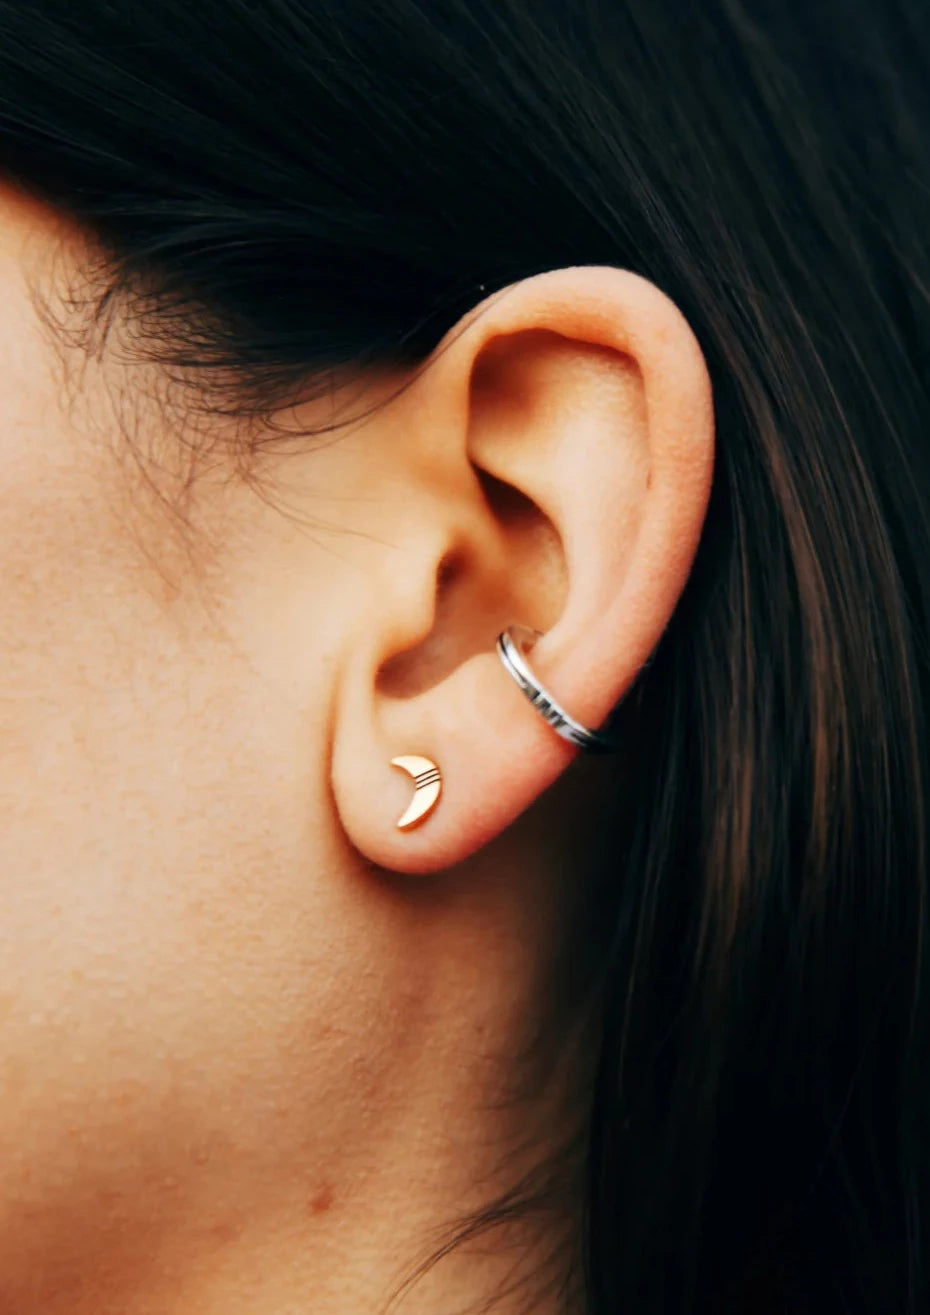 close-up of a models ear with a gold vermeil crescent moon stud, and just above it lies a silver cuff earring.